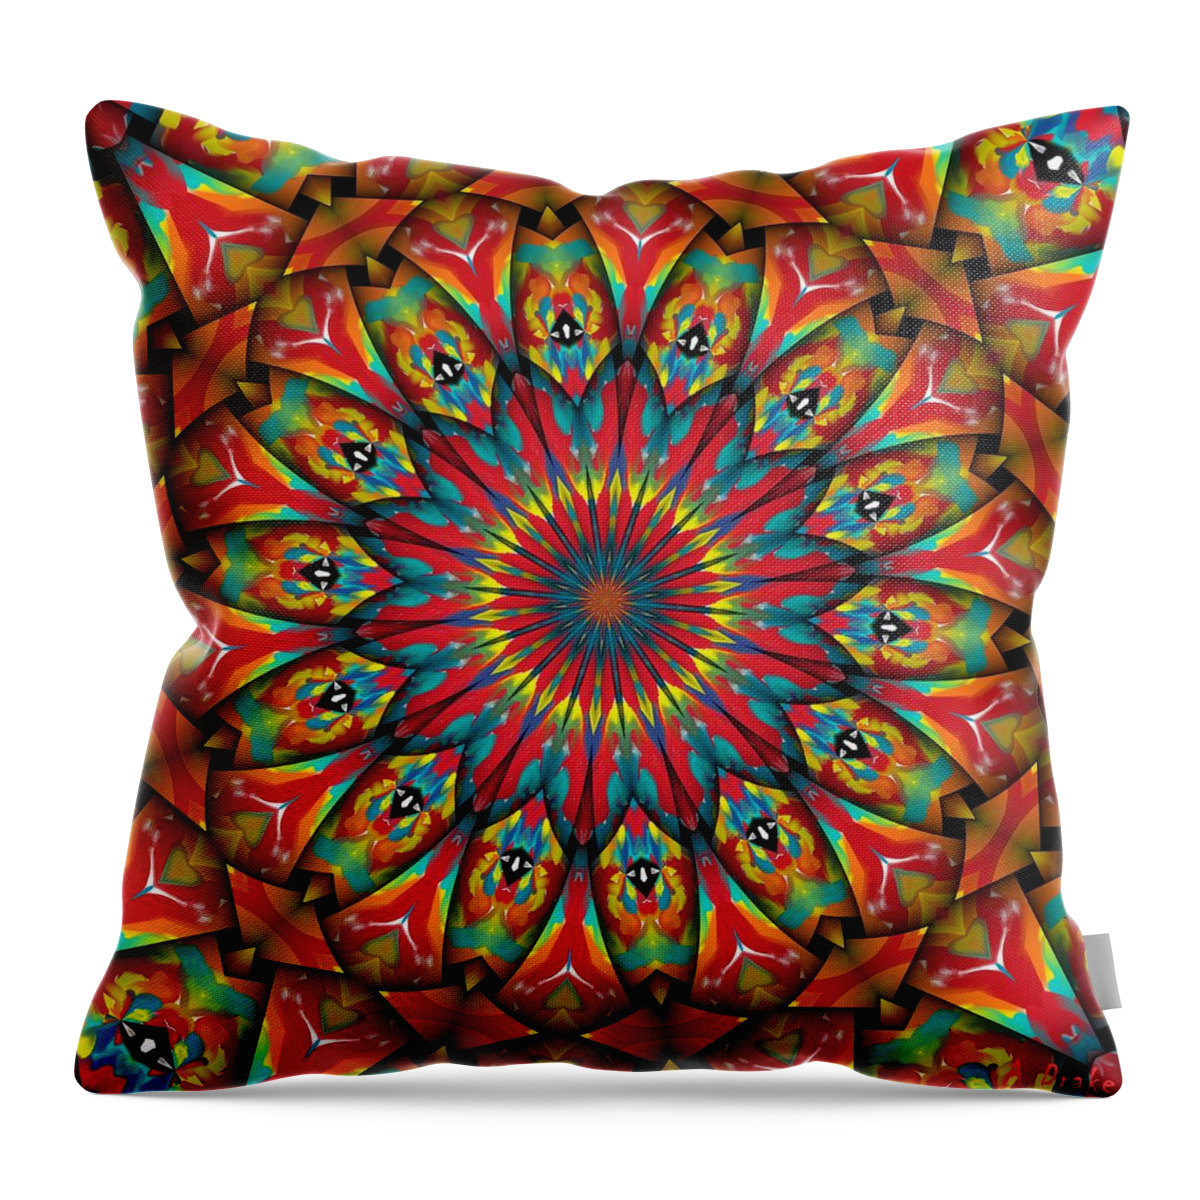 Sunset Throw Pillow featuring the digital art Sunsets in Texas by Alec Drake